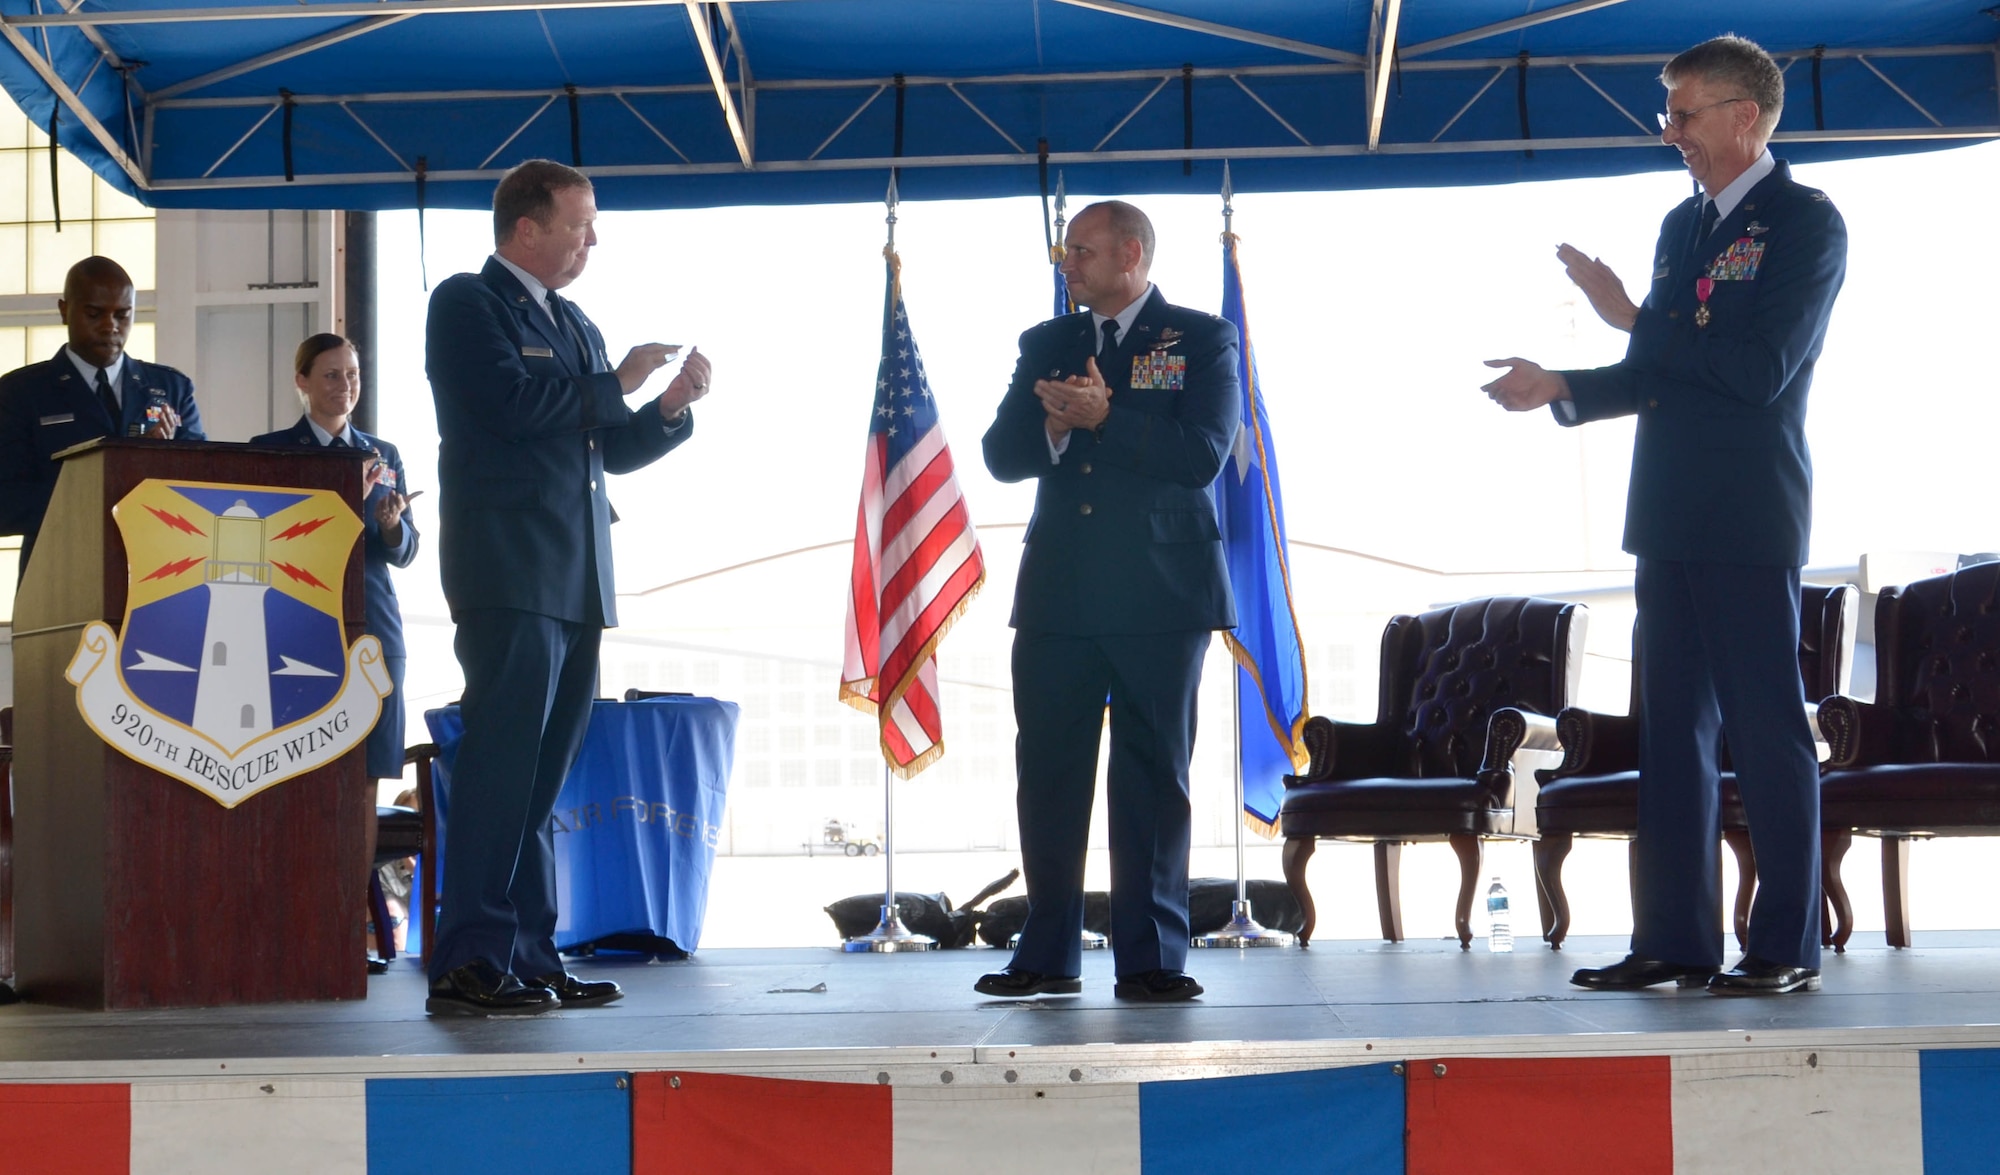 Col. Kurt Matthews (center stage) assumed command of the 920th Rescue Wing, Patrick Air Force Base, Florida, Dec. 3 in a change of command ceremony. Matthews replaced Col. Jeffrey L. Macrander (right) who served as the 920th RQW commander from August 2011 to December 2016. Maj. Gen. Richard W. Scobee (left), 10th Air Force commander, Naval Air Station Fort Worth Joint Reserve Base, Texas, officiated the ceremony that approximately 400 civilian and military guests attended. (U.S. Air Force photo./1st Lt. Anna-Marie Wyant)